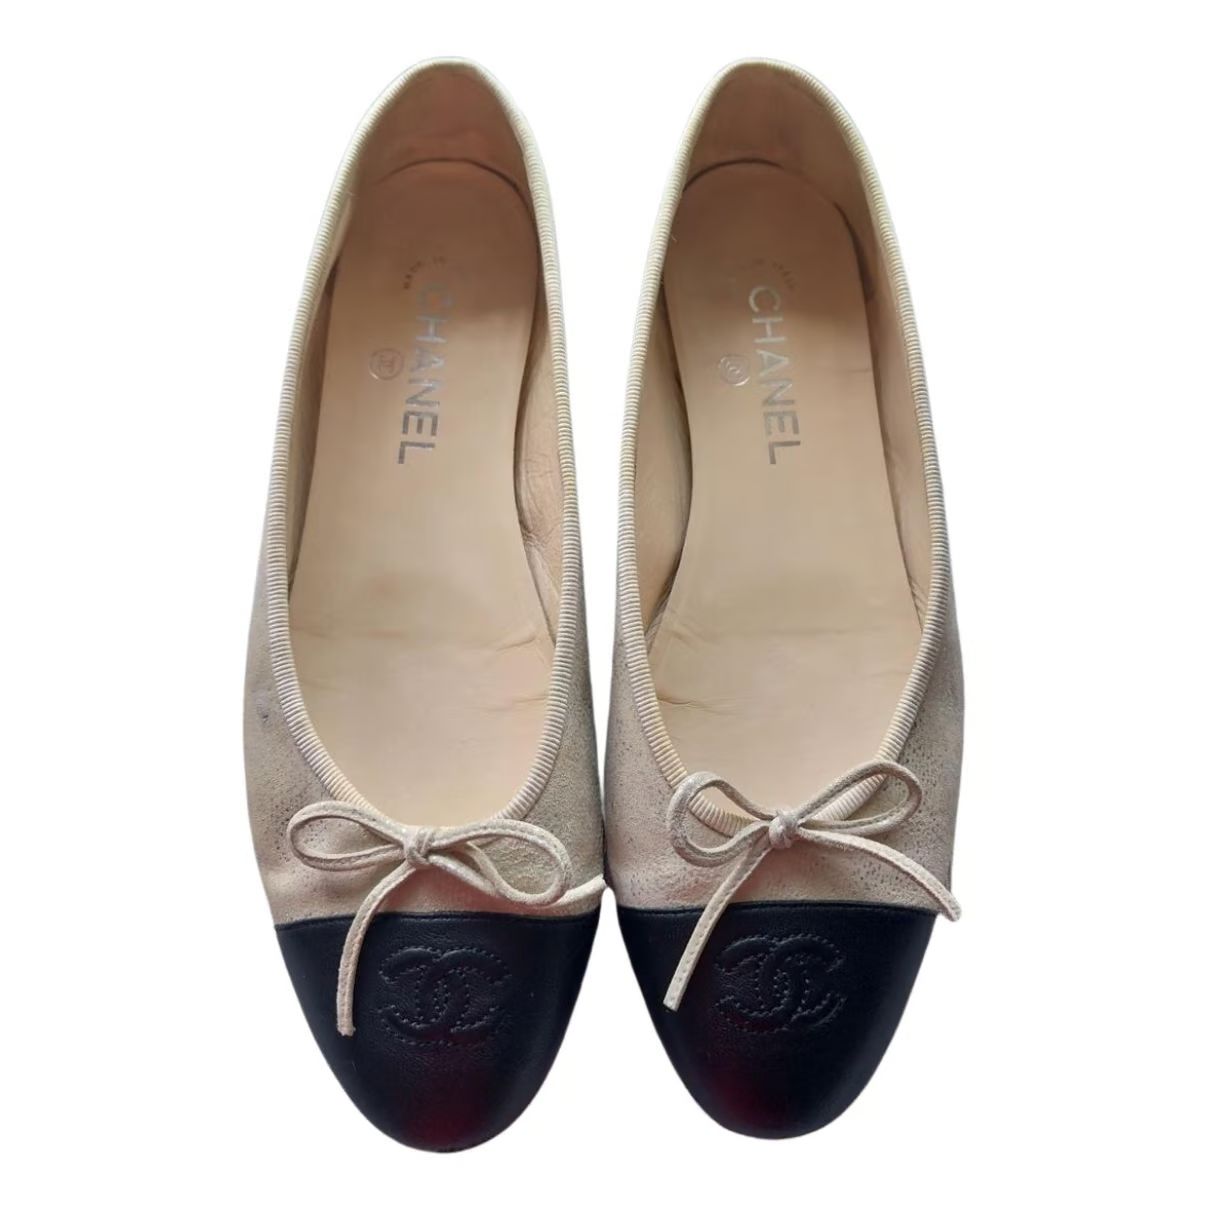 Chanel Cambon ballet flats | Vestiaire Collective (Global)